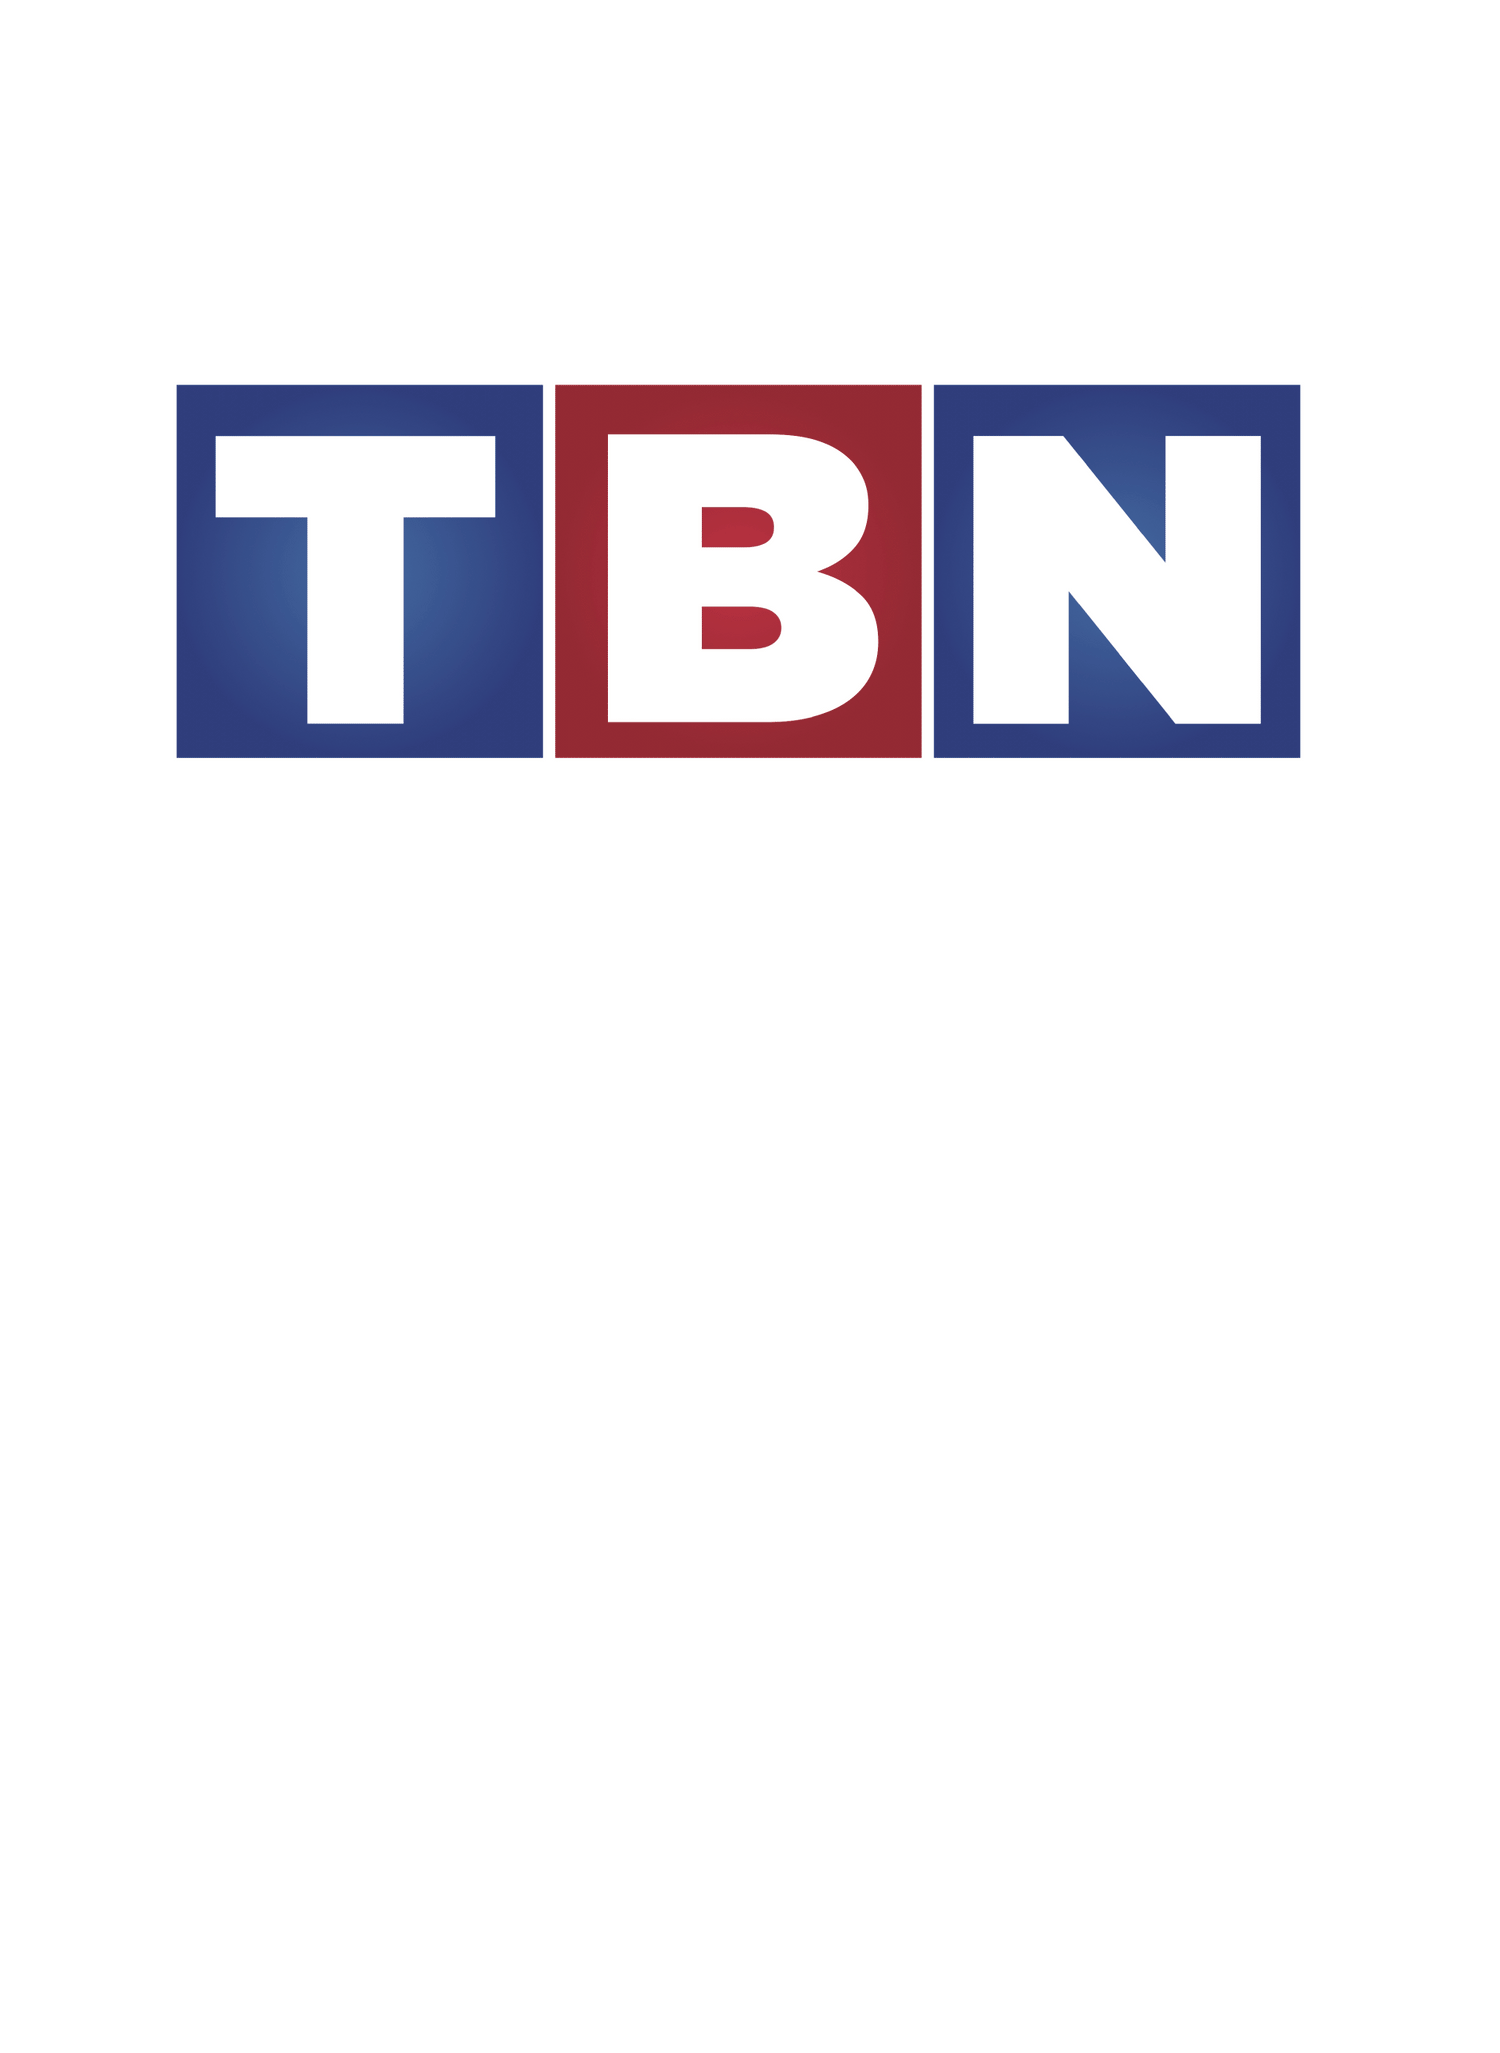 The Trinity Broadcasting Family of Networks